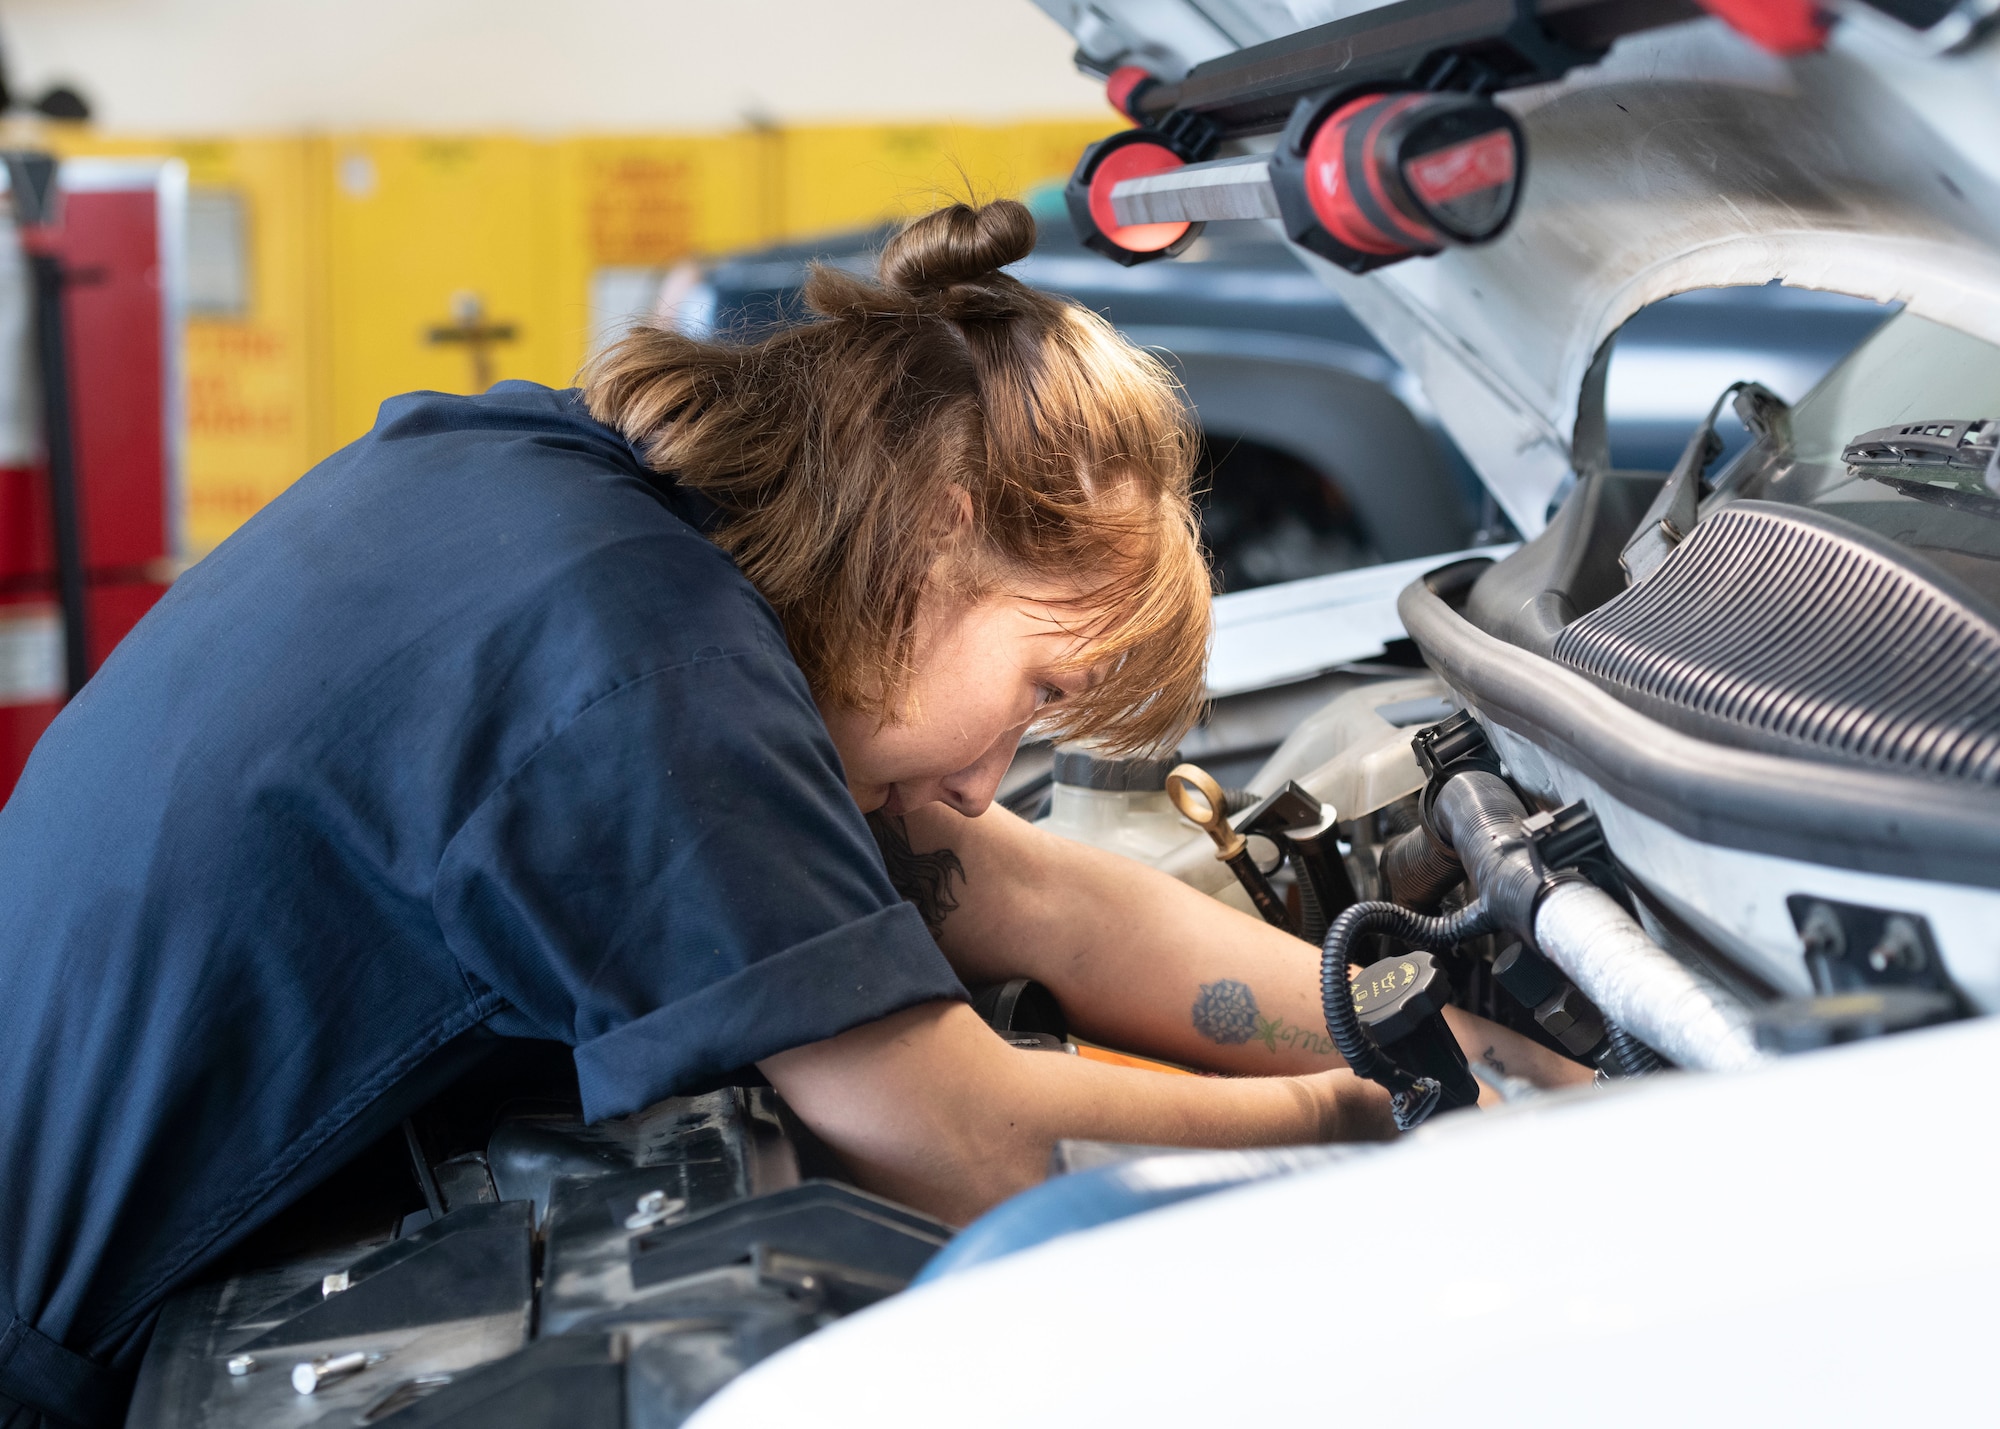 Airman 1st Class Maddison Stockman, 374th Logistics Readiness Squadron Vehicle Maintenance Flight apprentice, replaces an exhaust gas recirculation part on a government vehicle at Yokota Air Base, Japan, Aug. 17, 2022